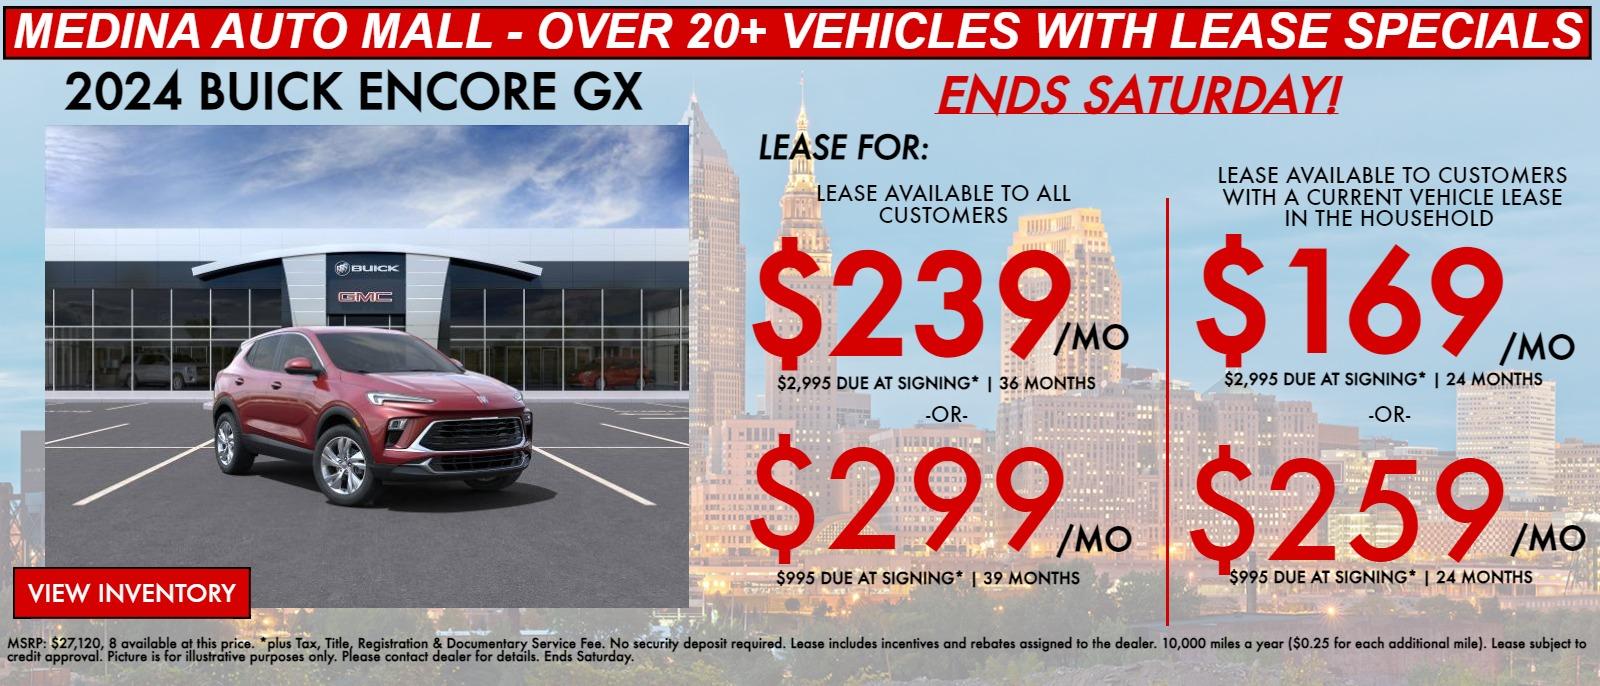 ENCORE GX lease special deals in Medina, OH